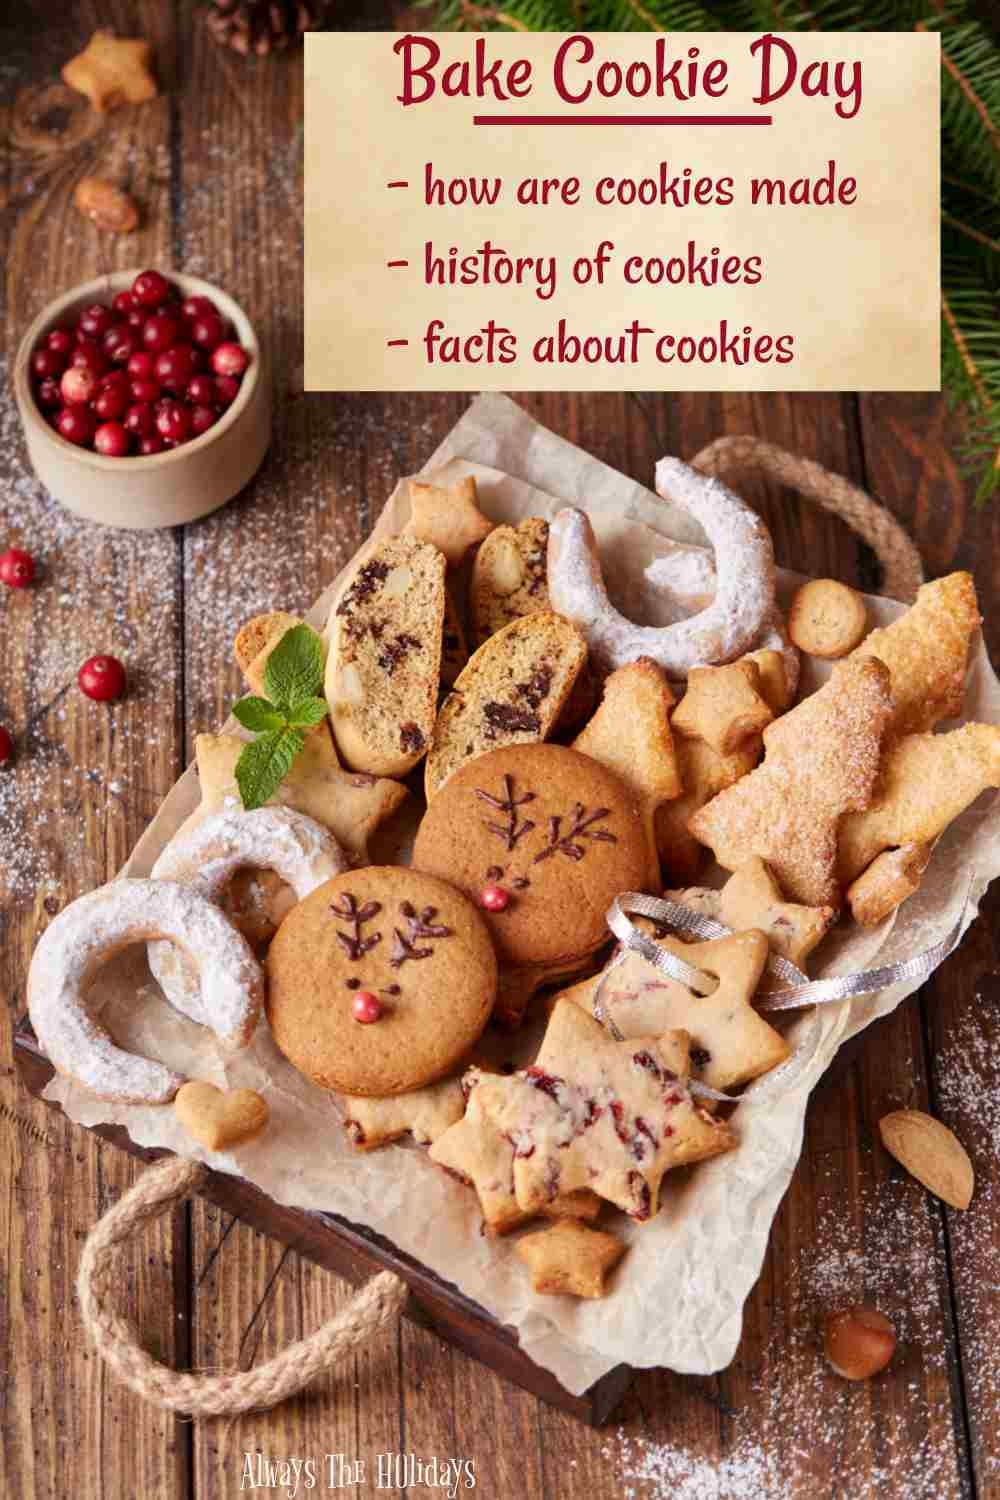 Platter of cookies with words Bake Cookies Day - how are cookies made - history of cookies - facts about cookies.